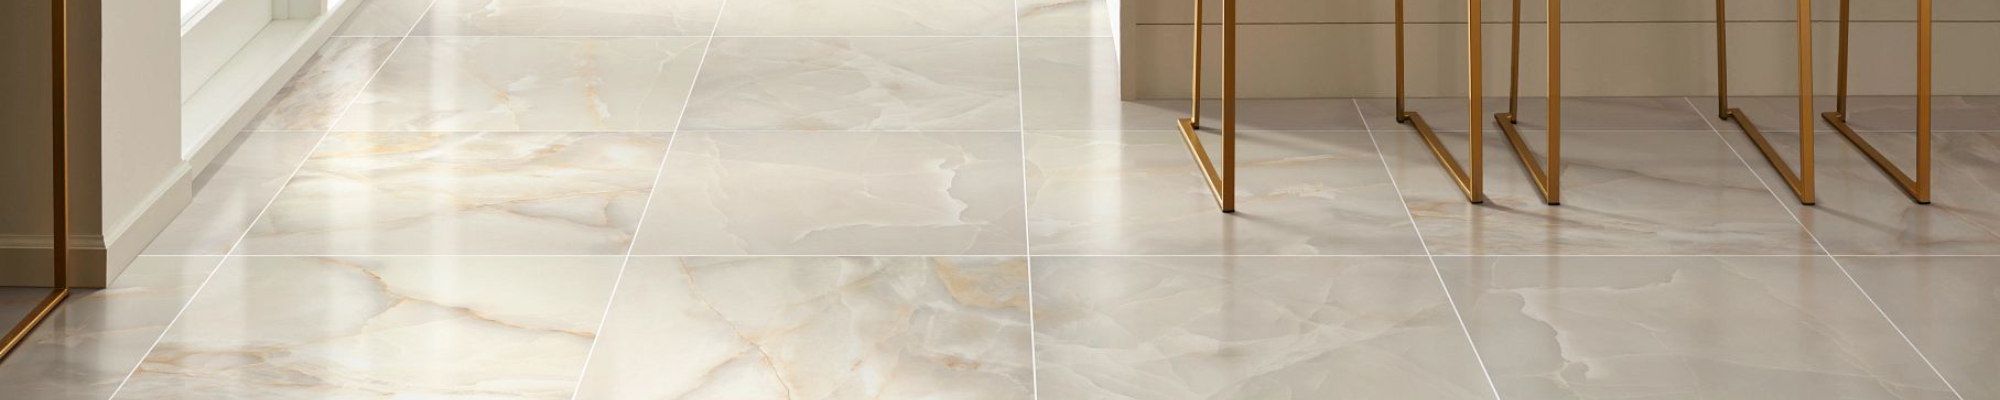 Find a variety of beautiful tile flooring in all shapes, sizes, styles and colors here at your local store, SELECT FLOORS LTD in Okotoks